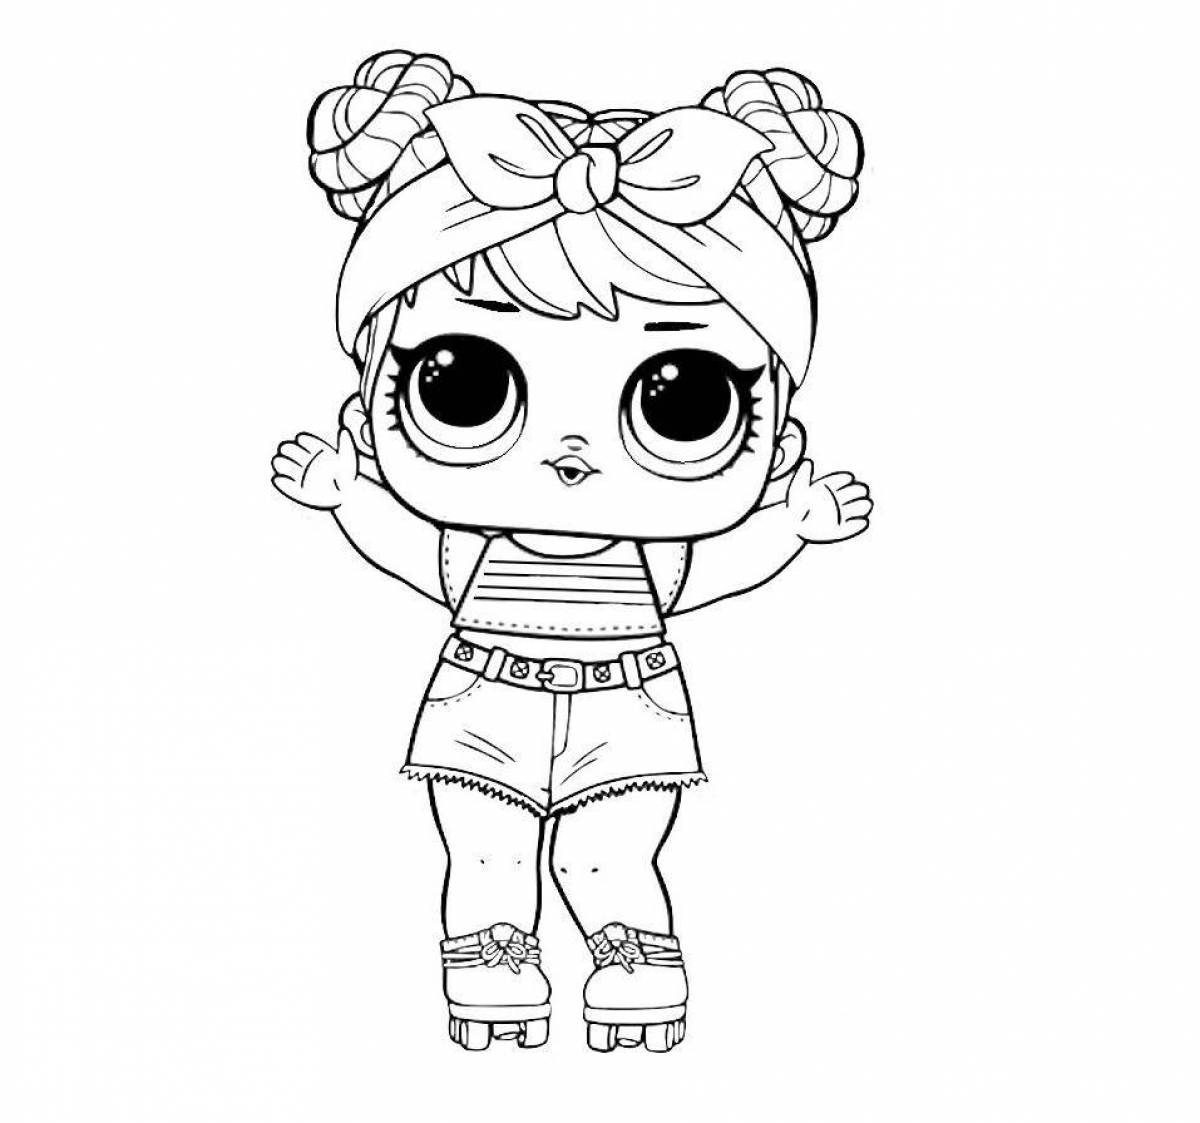 Colorful lol doll coloring print